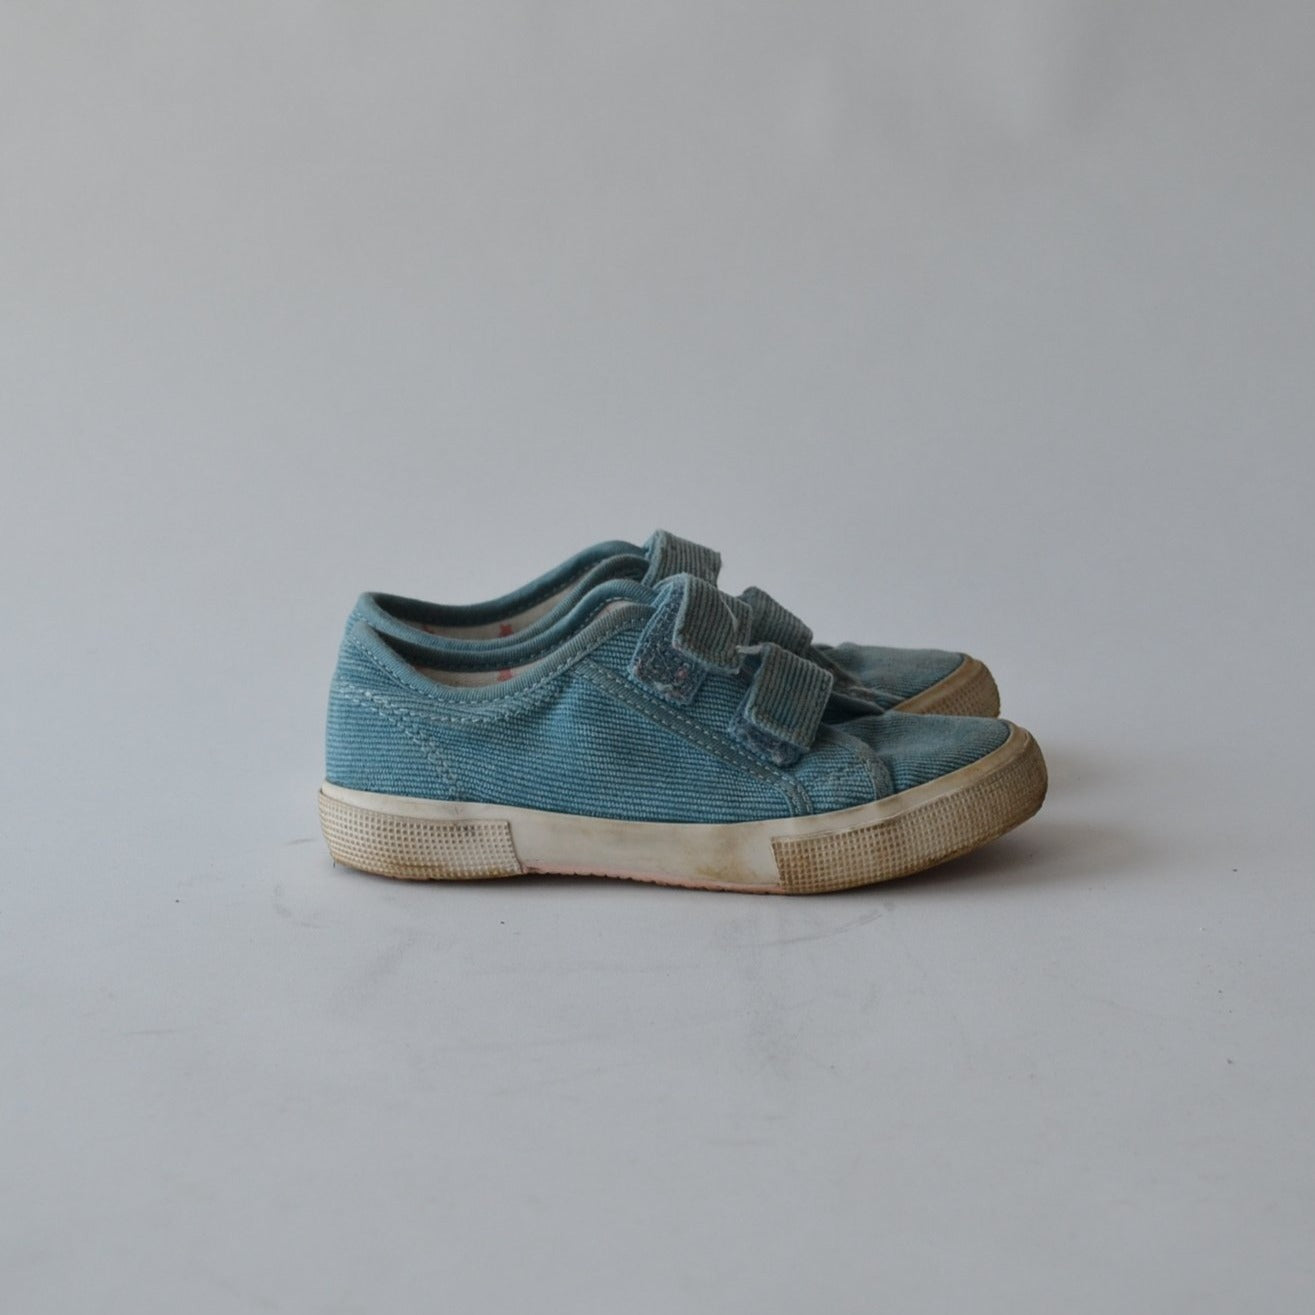 Trainers - Blue with Velcro Straps - Shoe Size 11 (jr)